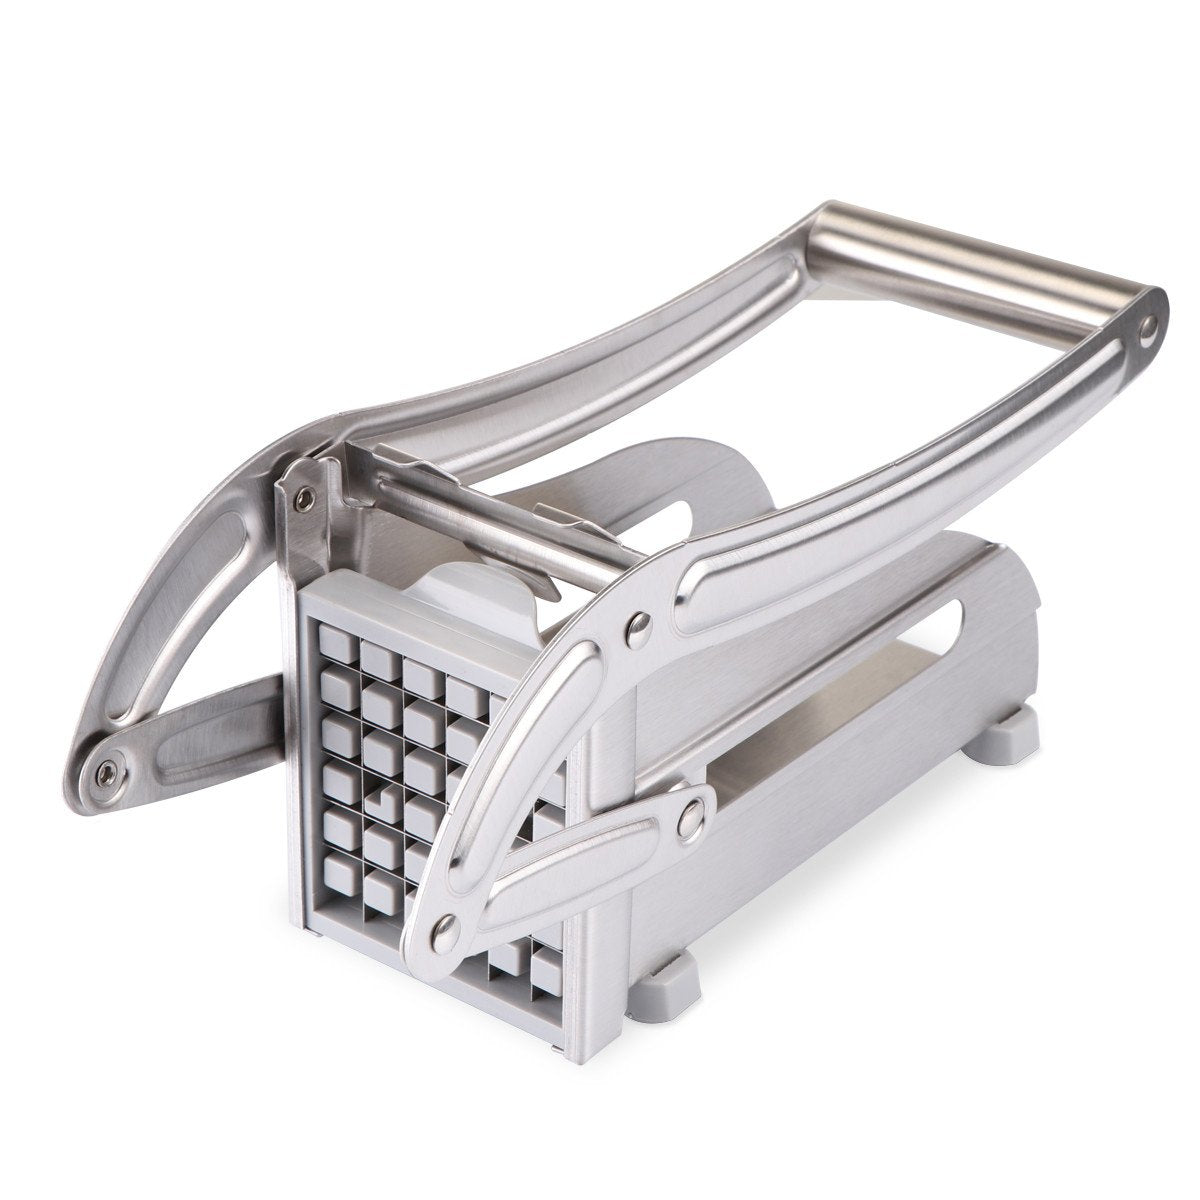 Stainless Steel French Fry Cutter Potato Cutter Fries Slicer